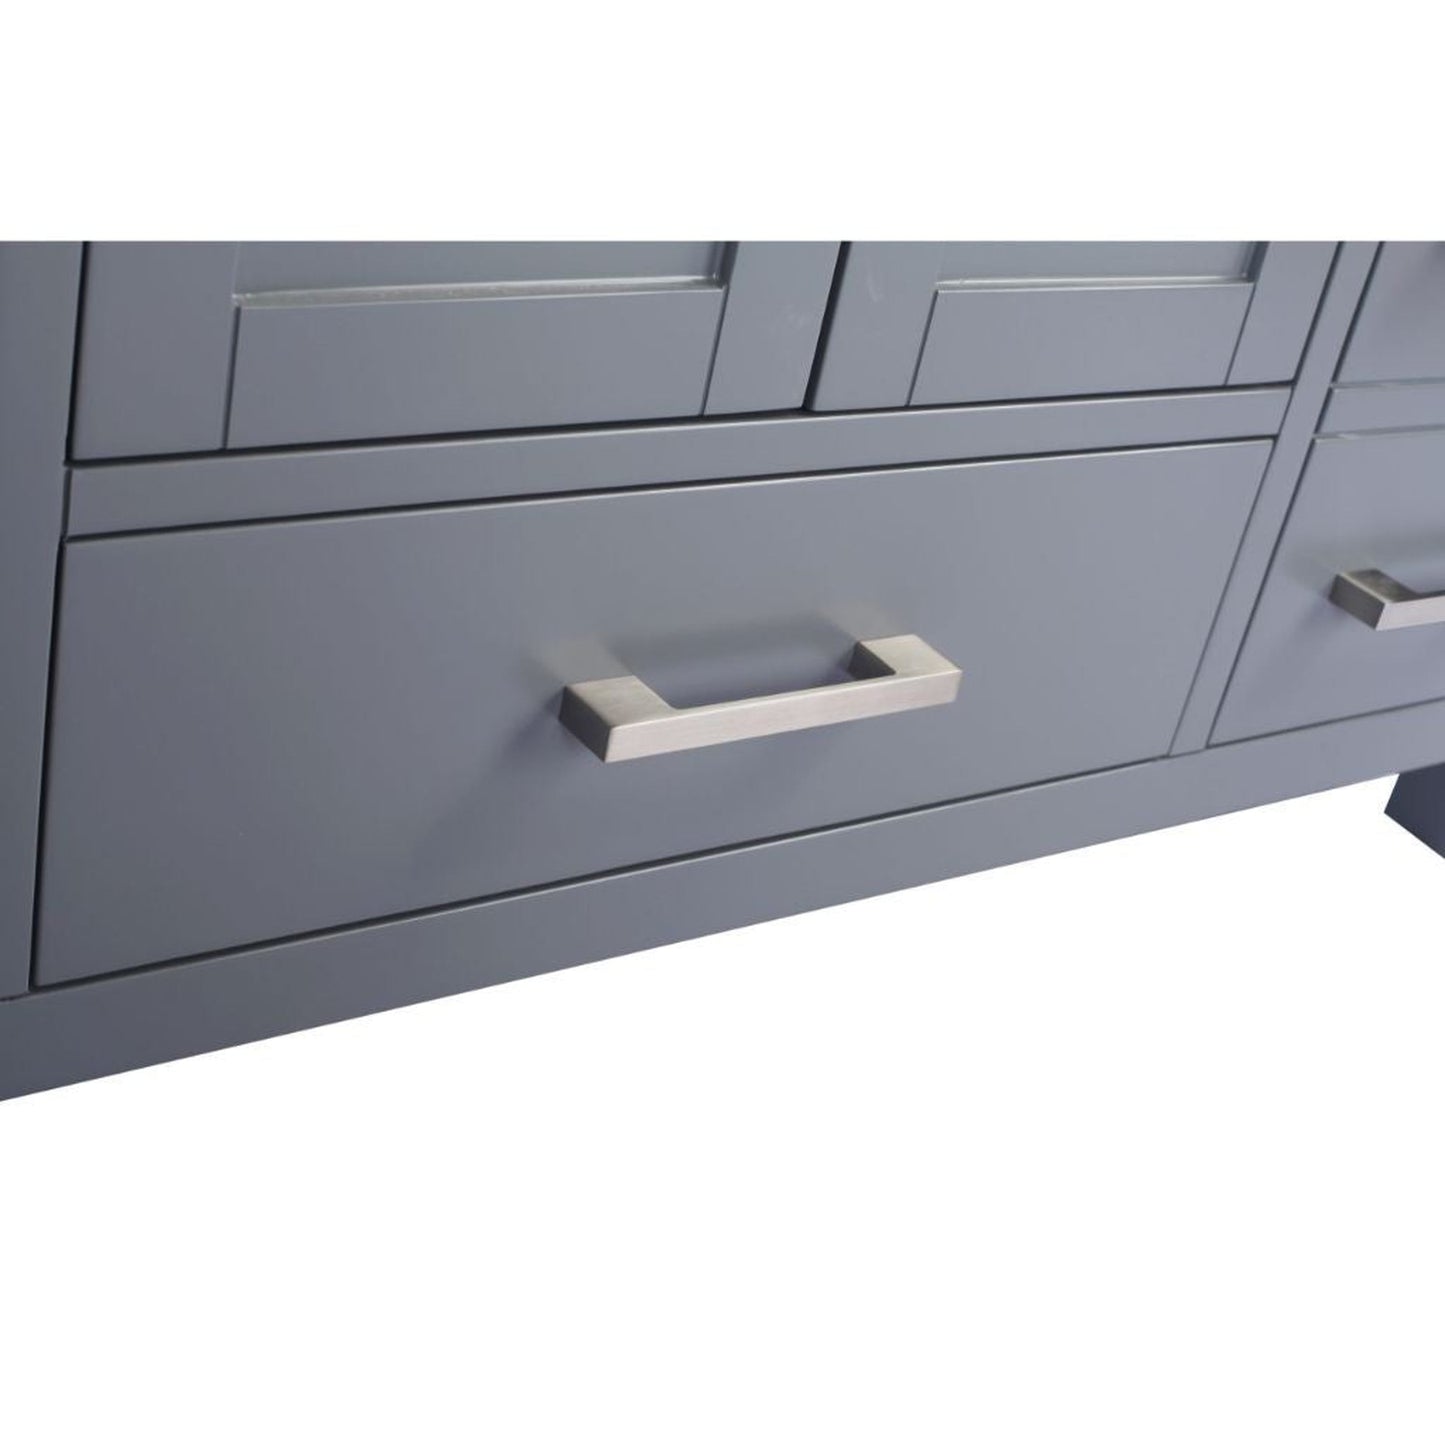 Laviva Wilson 48" Gray Vanity Base and Matte White Viva Stone Solid Surface Countertop With Integrated Sink